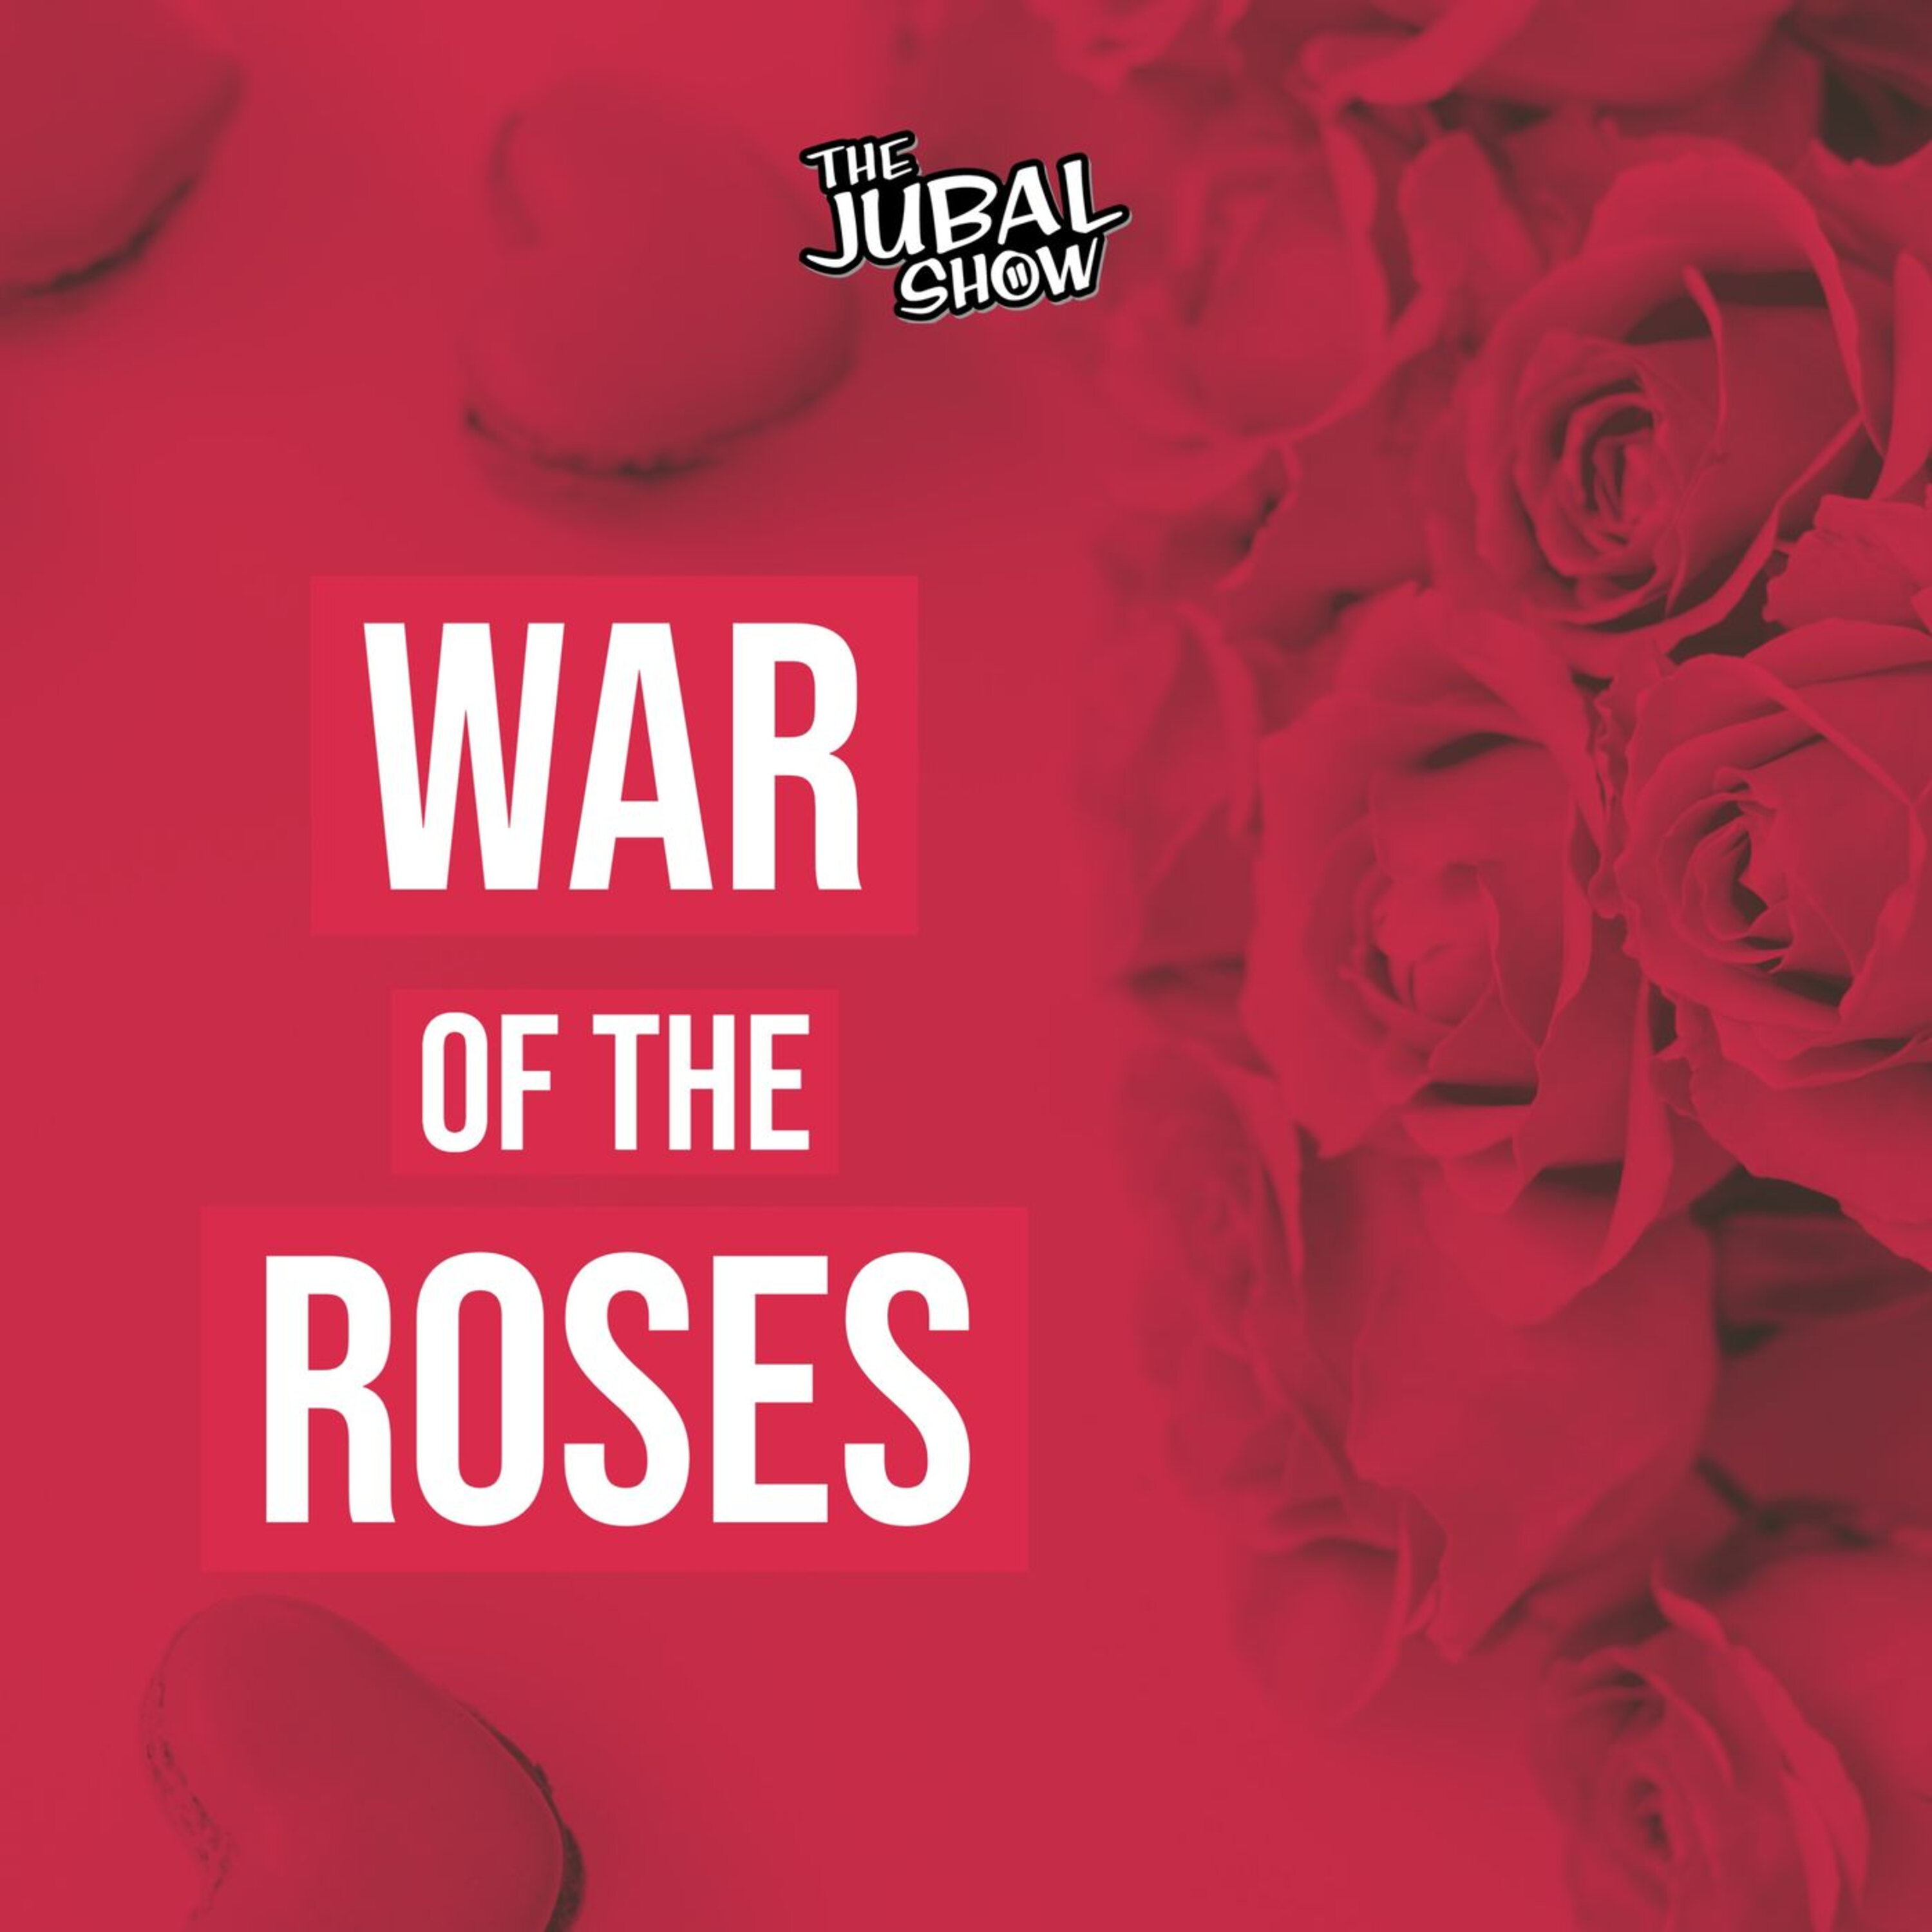 The Jubal Show catches a sticky cheater in this War of the Roses!